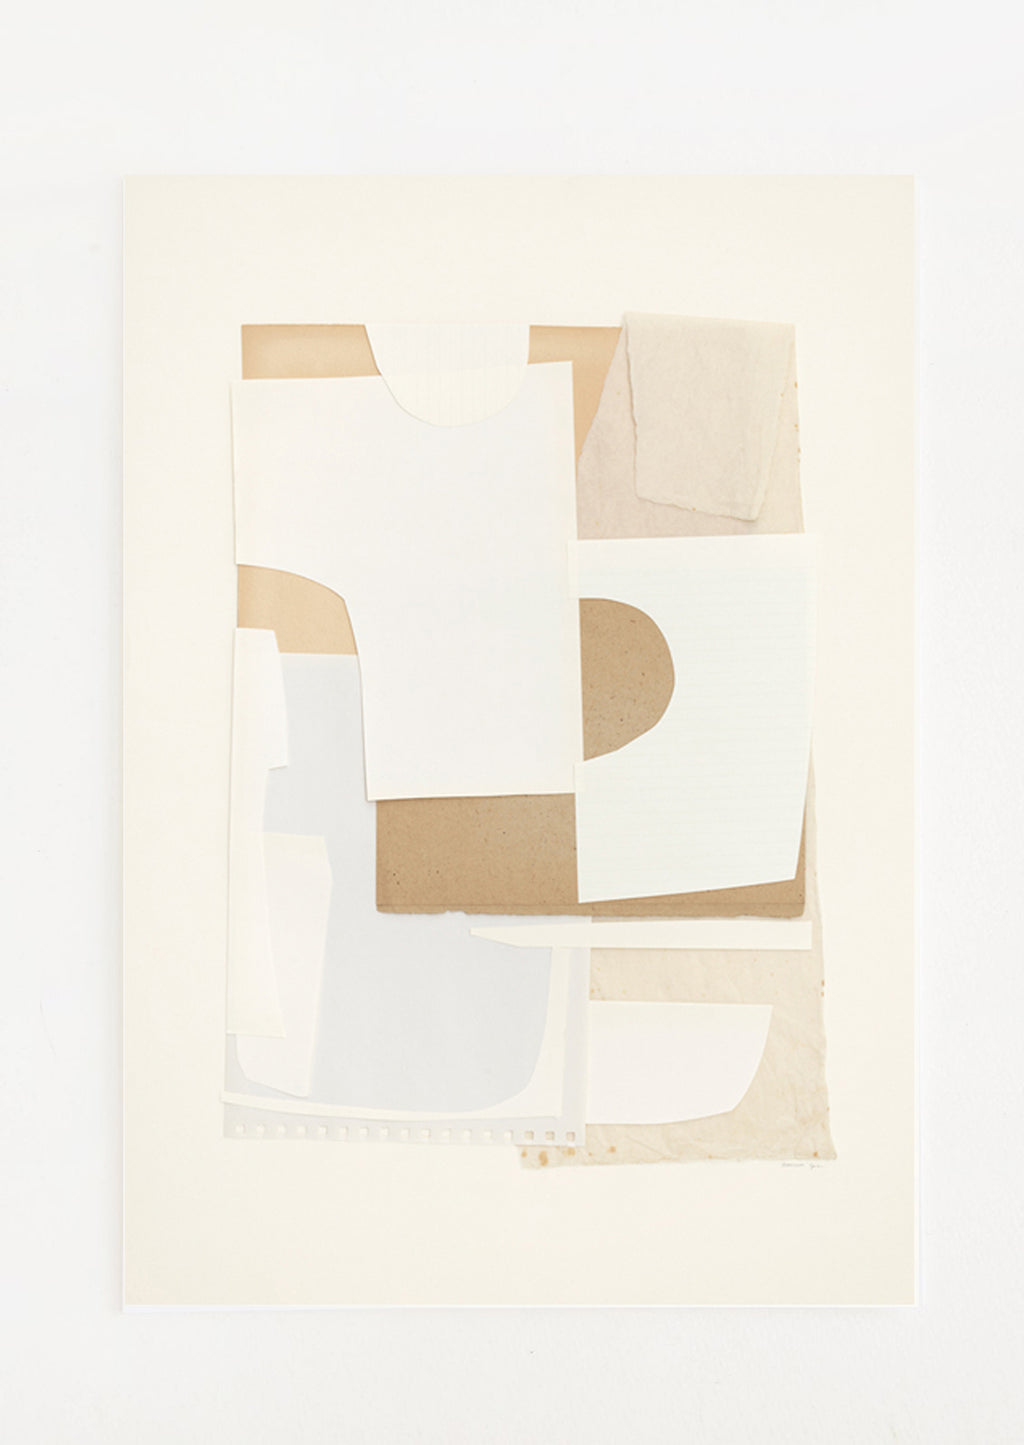 3: An abstract artwork with layers of cutout paper in neutral tones.